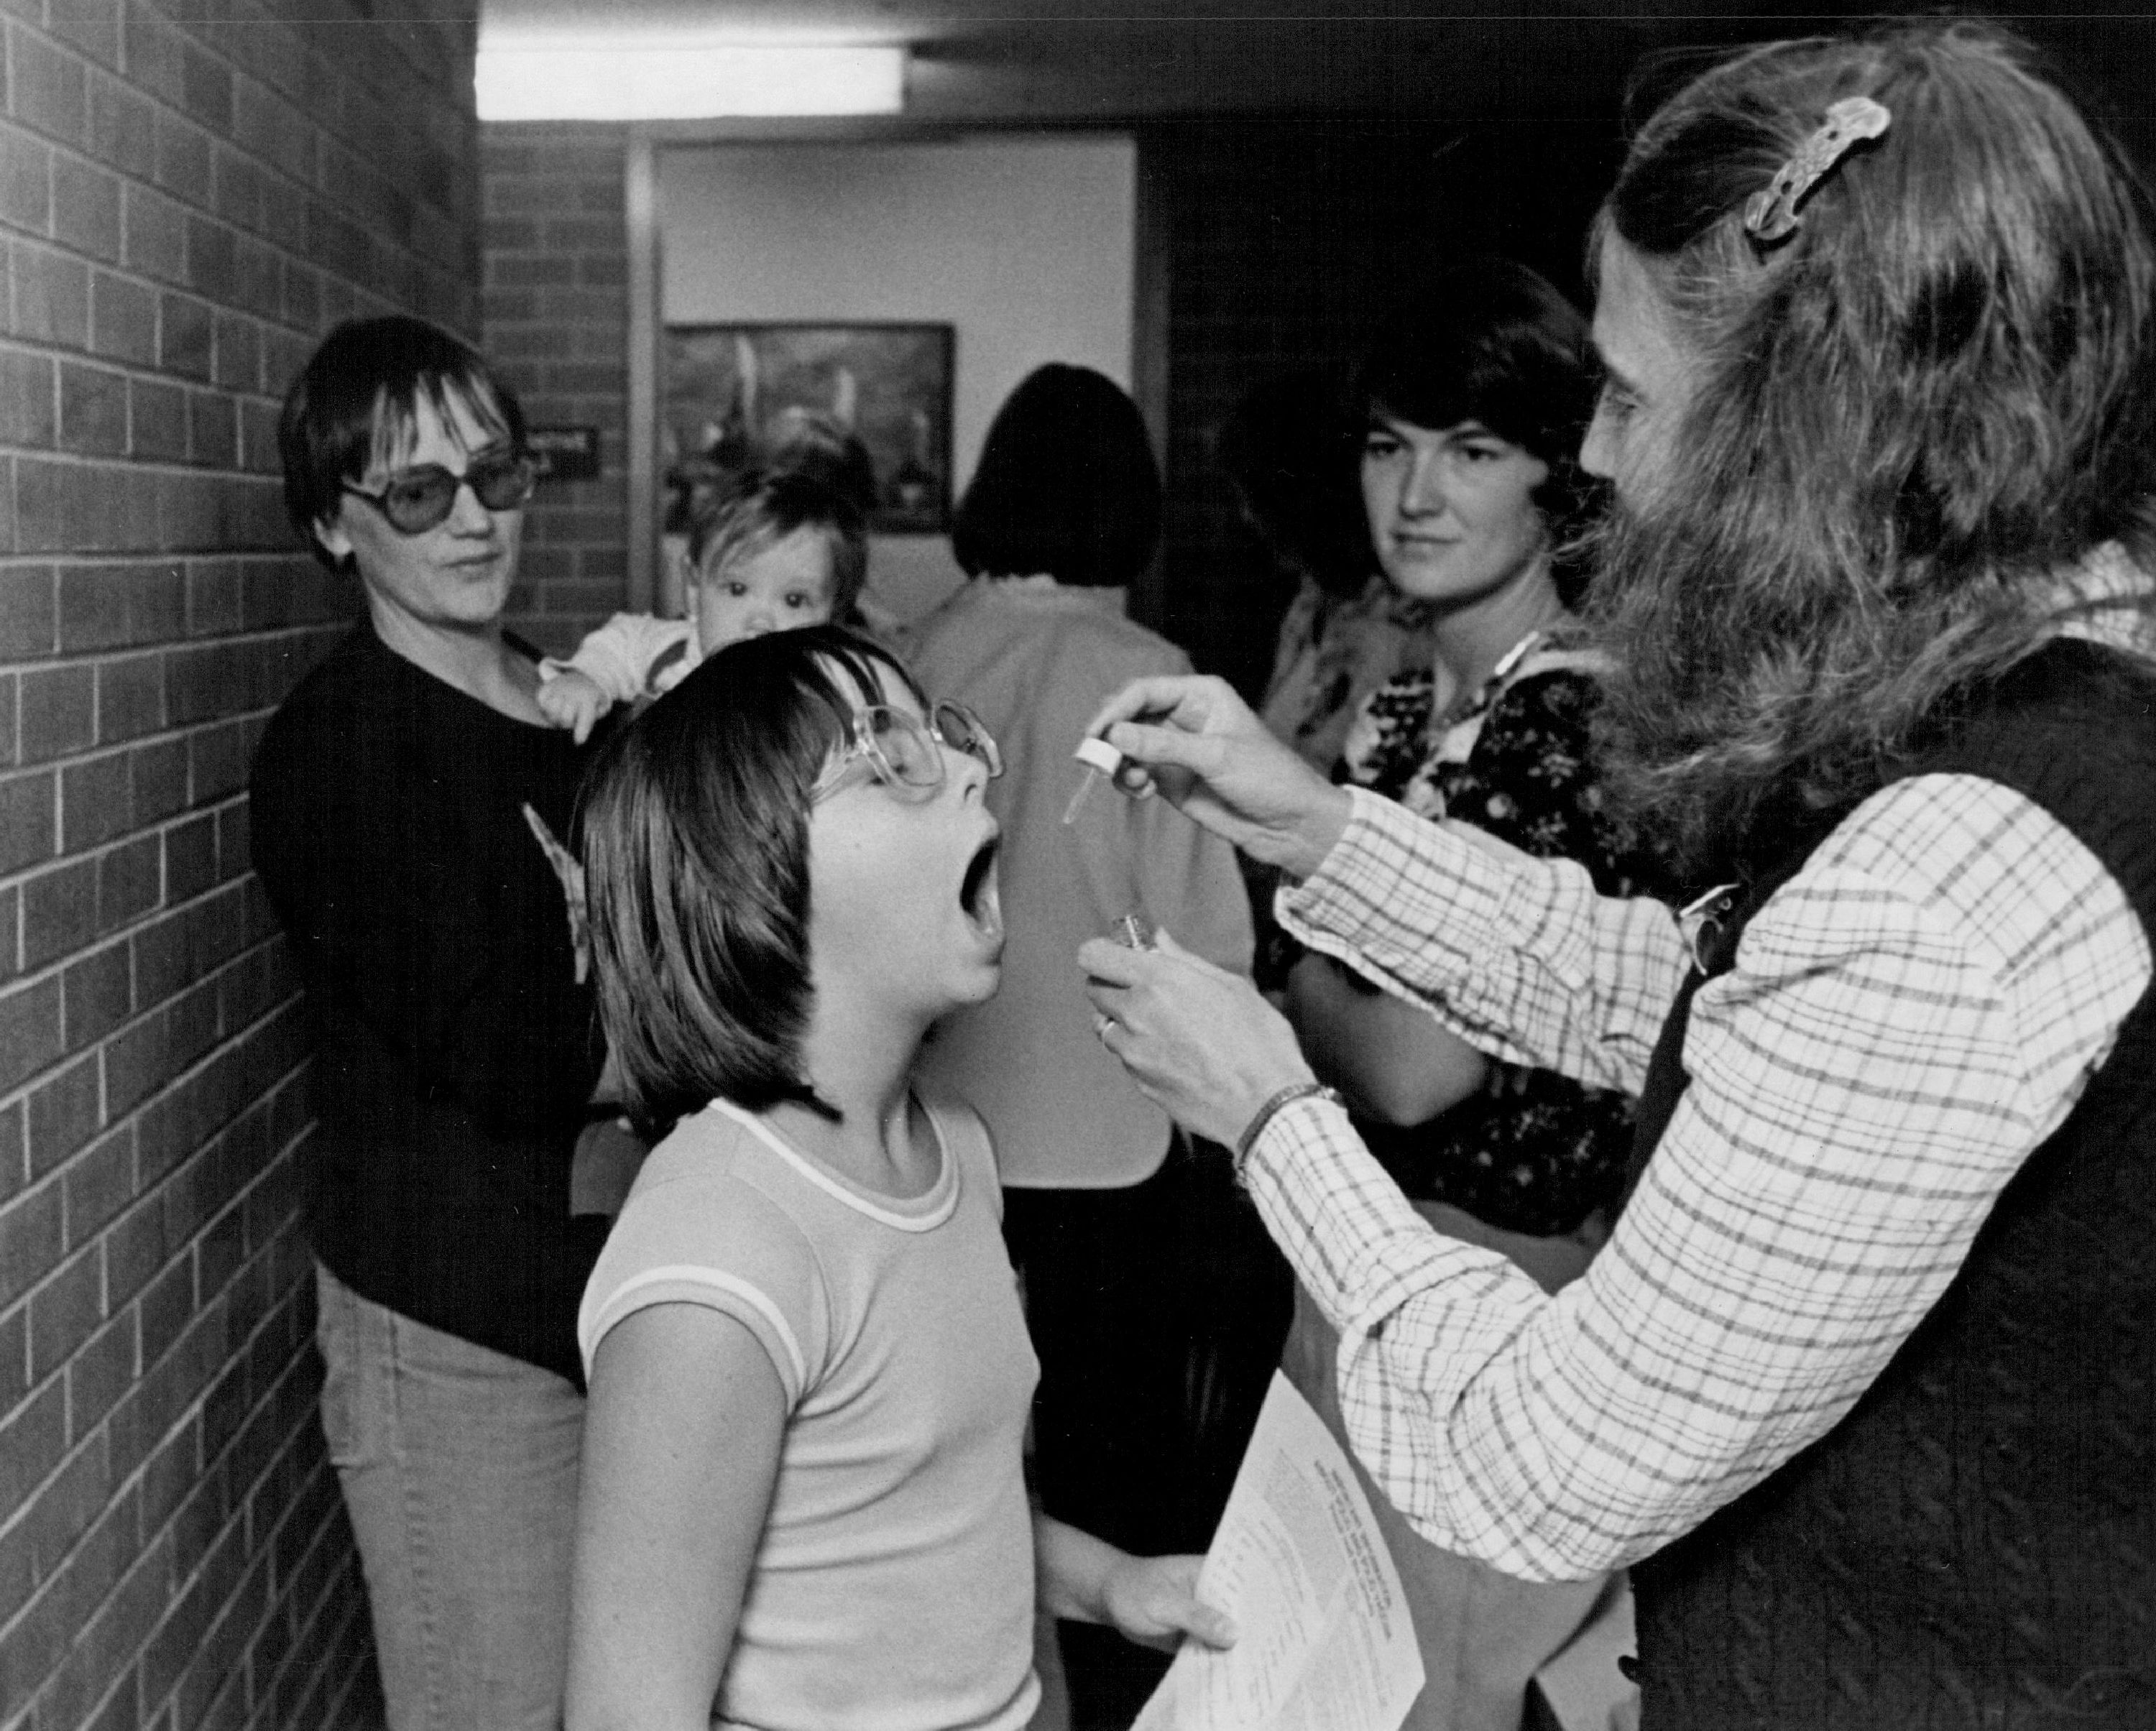 Lori Kelly, a public-health nurse, administers polio vaccine on Sept. 13,1979 to Kama Rotoli, 10, who was one of more than 1,500 school children in Jefferson Country who didn't receive immunization by a deadline. The shots were required by the state Immunization law and were necessary for entrance into public school. (Ed Maker/The Denver Post via Getty Images)